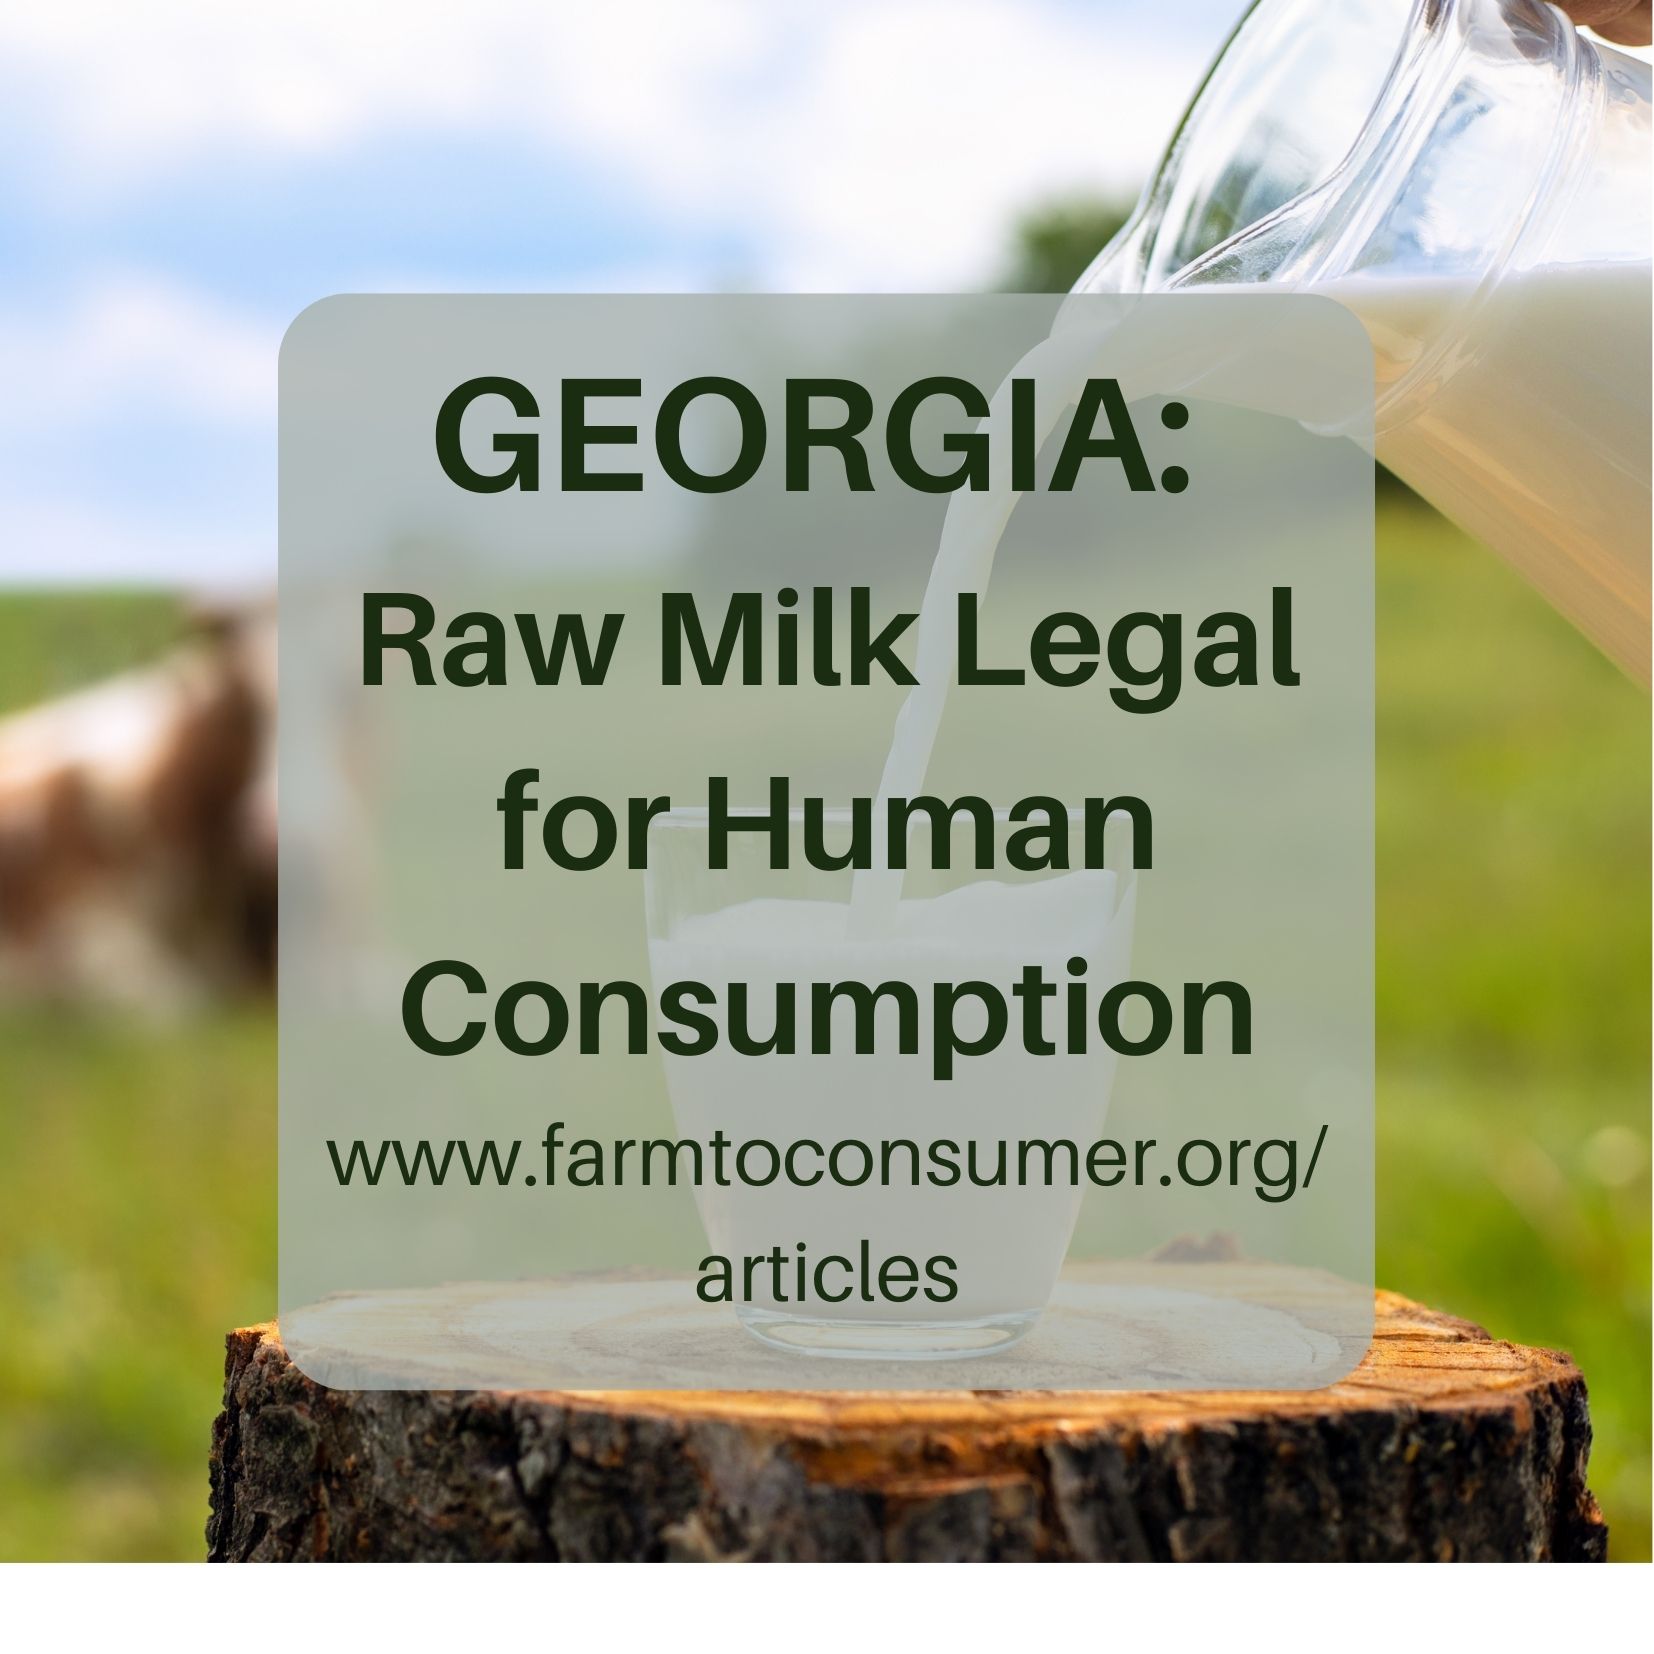 Direct sales of raw milk to the consumer are likely coming to